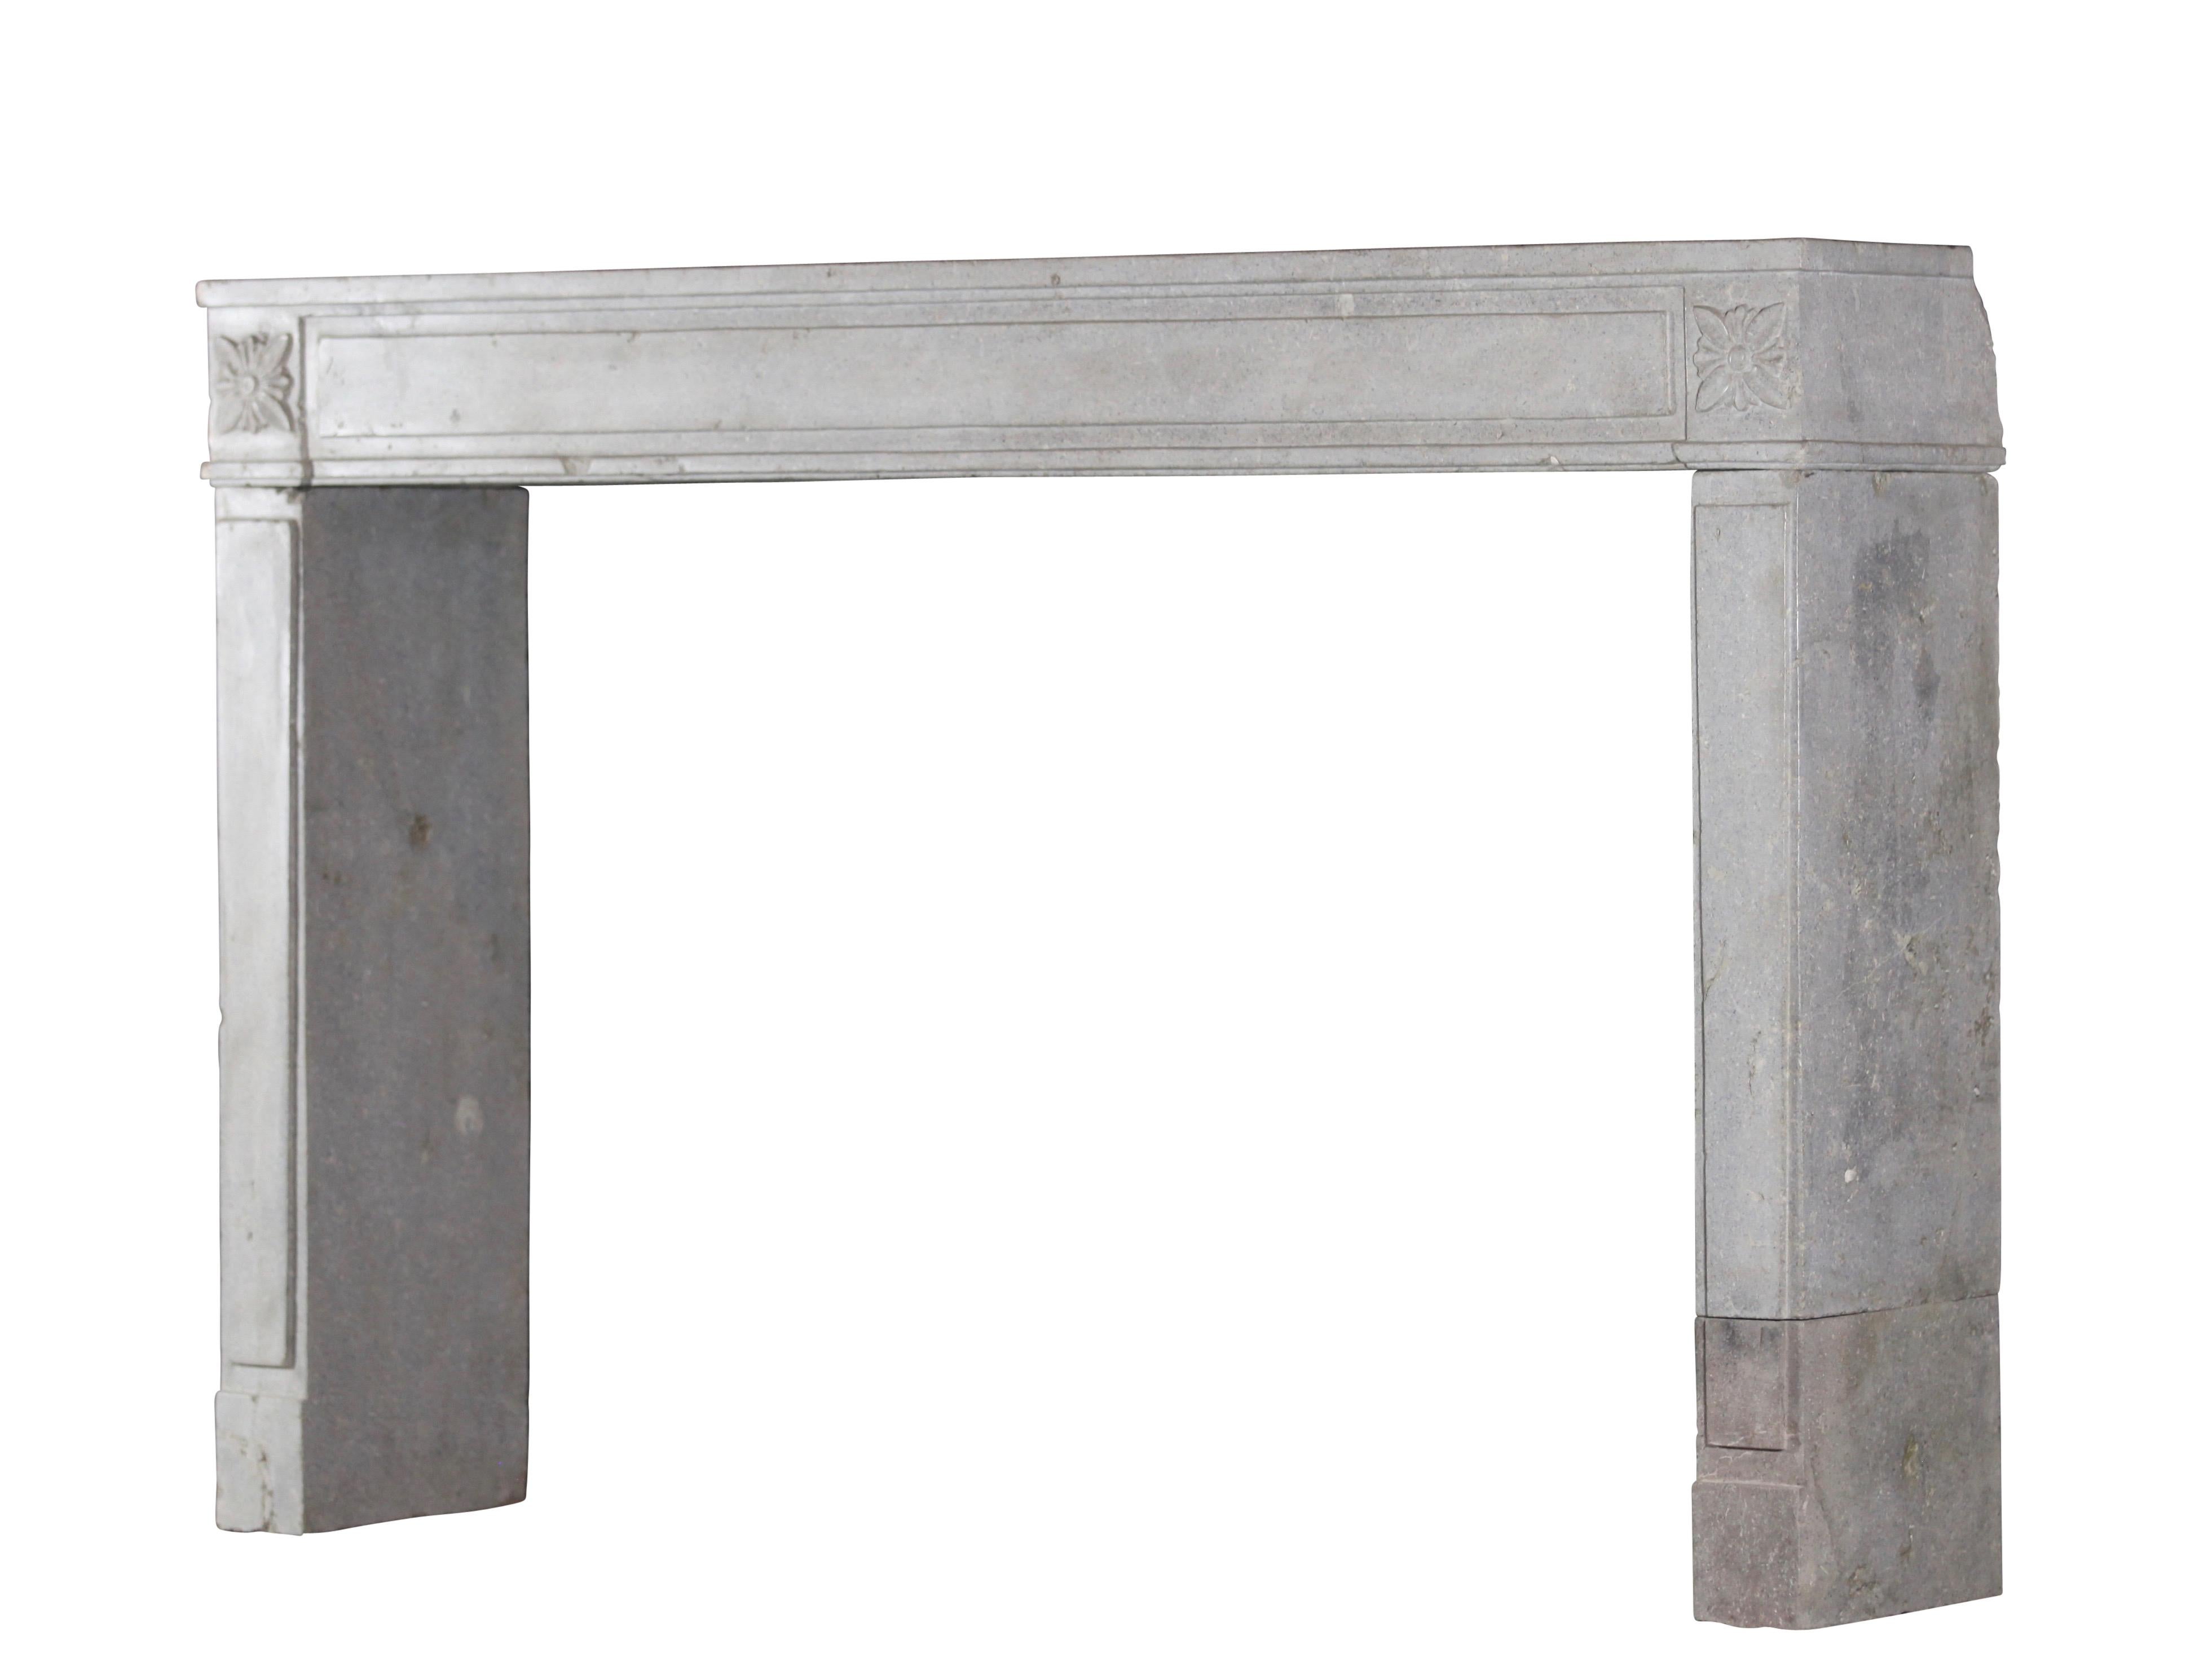 This original rustic French grey fireplace surround with straight lines comes from the Beaujolais region and is from the Louis XVI period. The stone is a bicolor hard stone fireplace surround, 18th century. Right jamb base has been